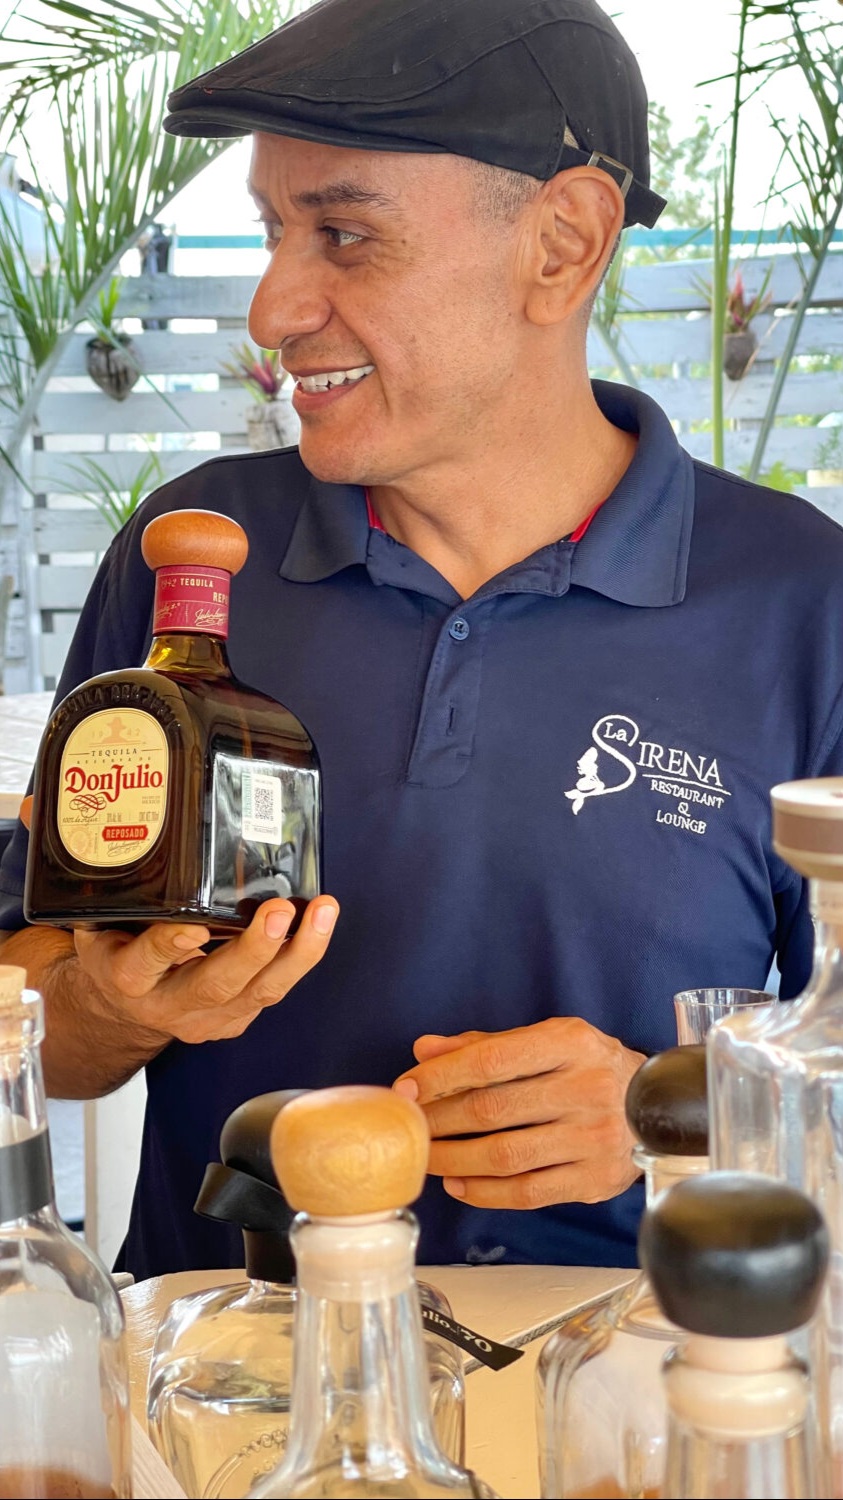 El Maestro Tequilero holding a bottle of Don Julio tequila during Tequila University on Mondays at 4pm at La Sirena Puerto Morelos.